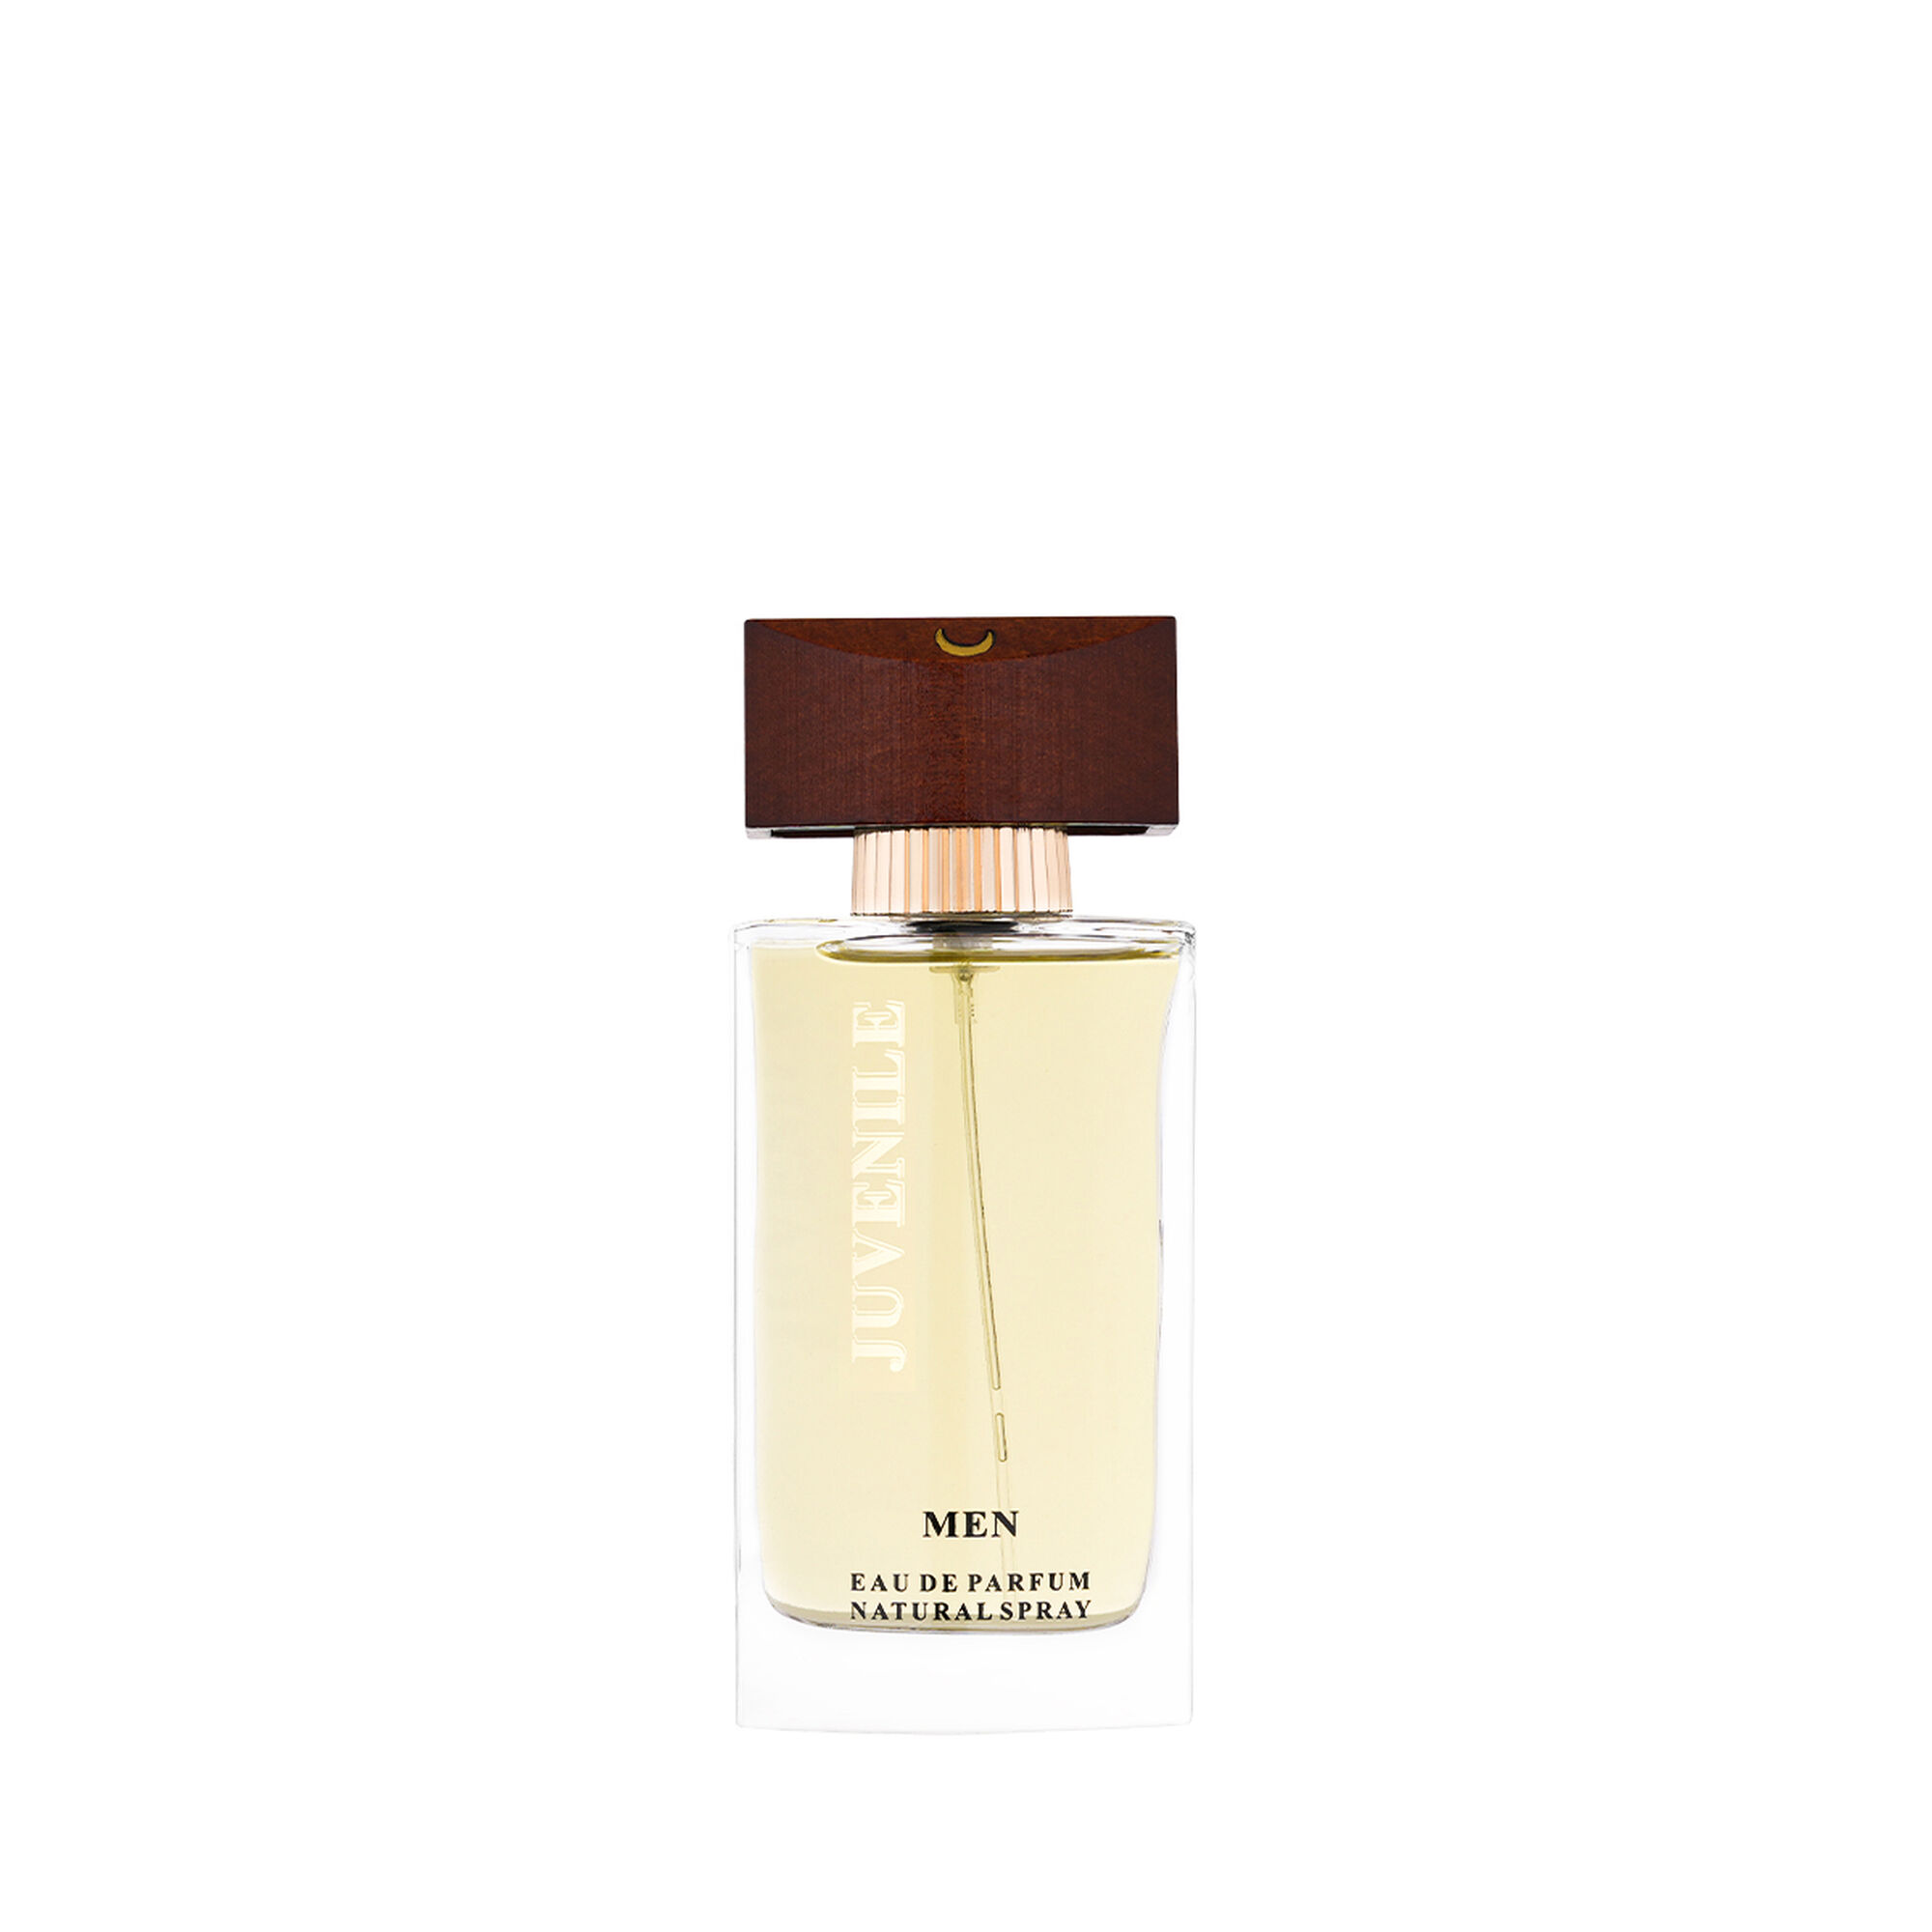 Juvenile Perfume by New 150ml